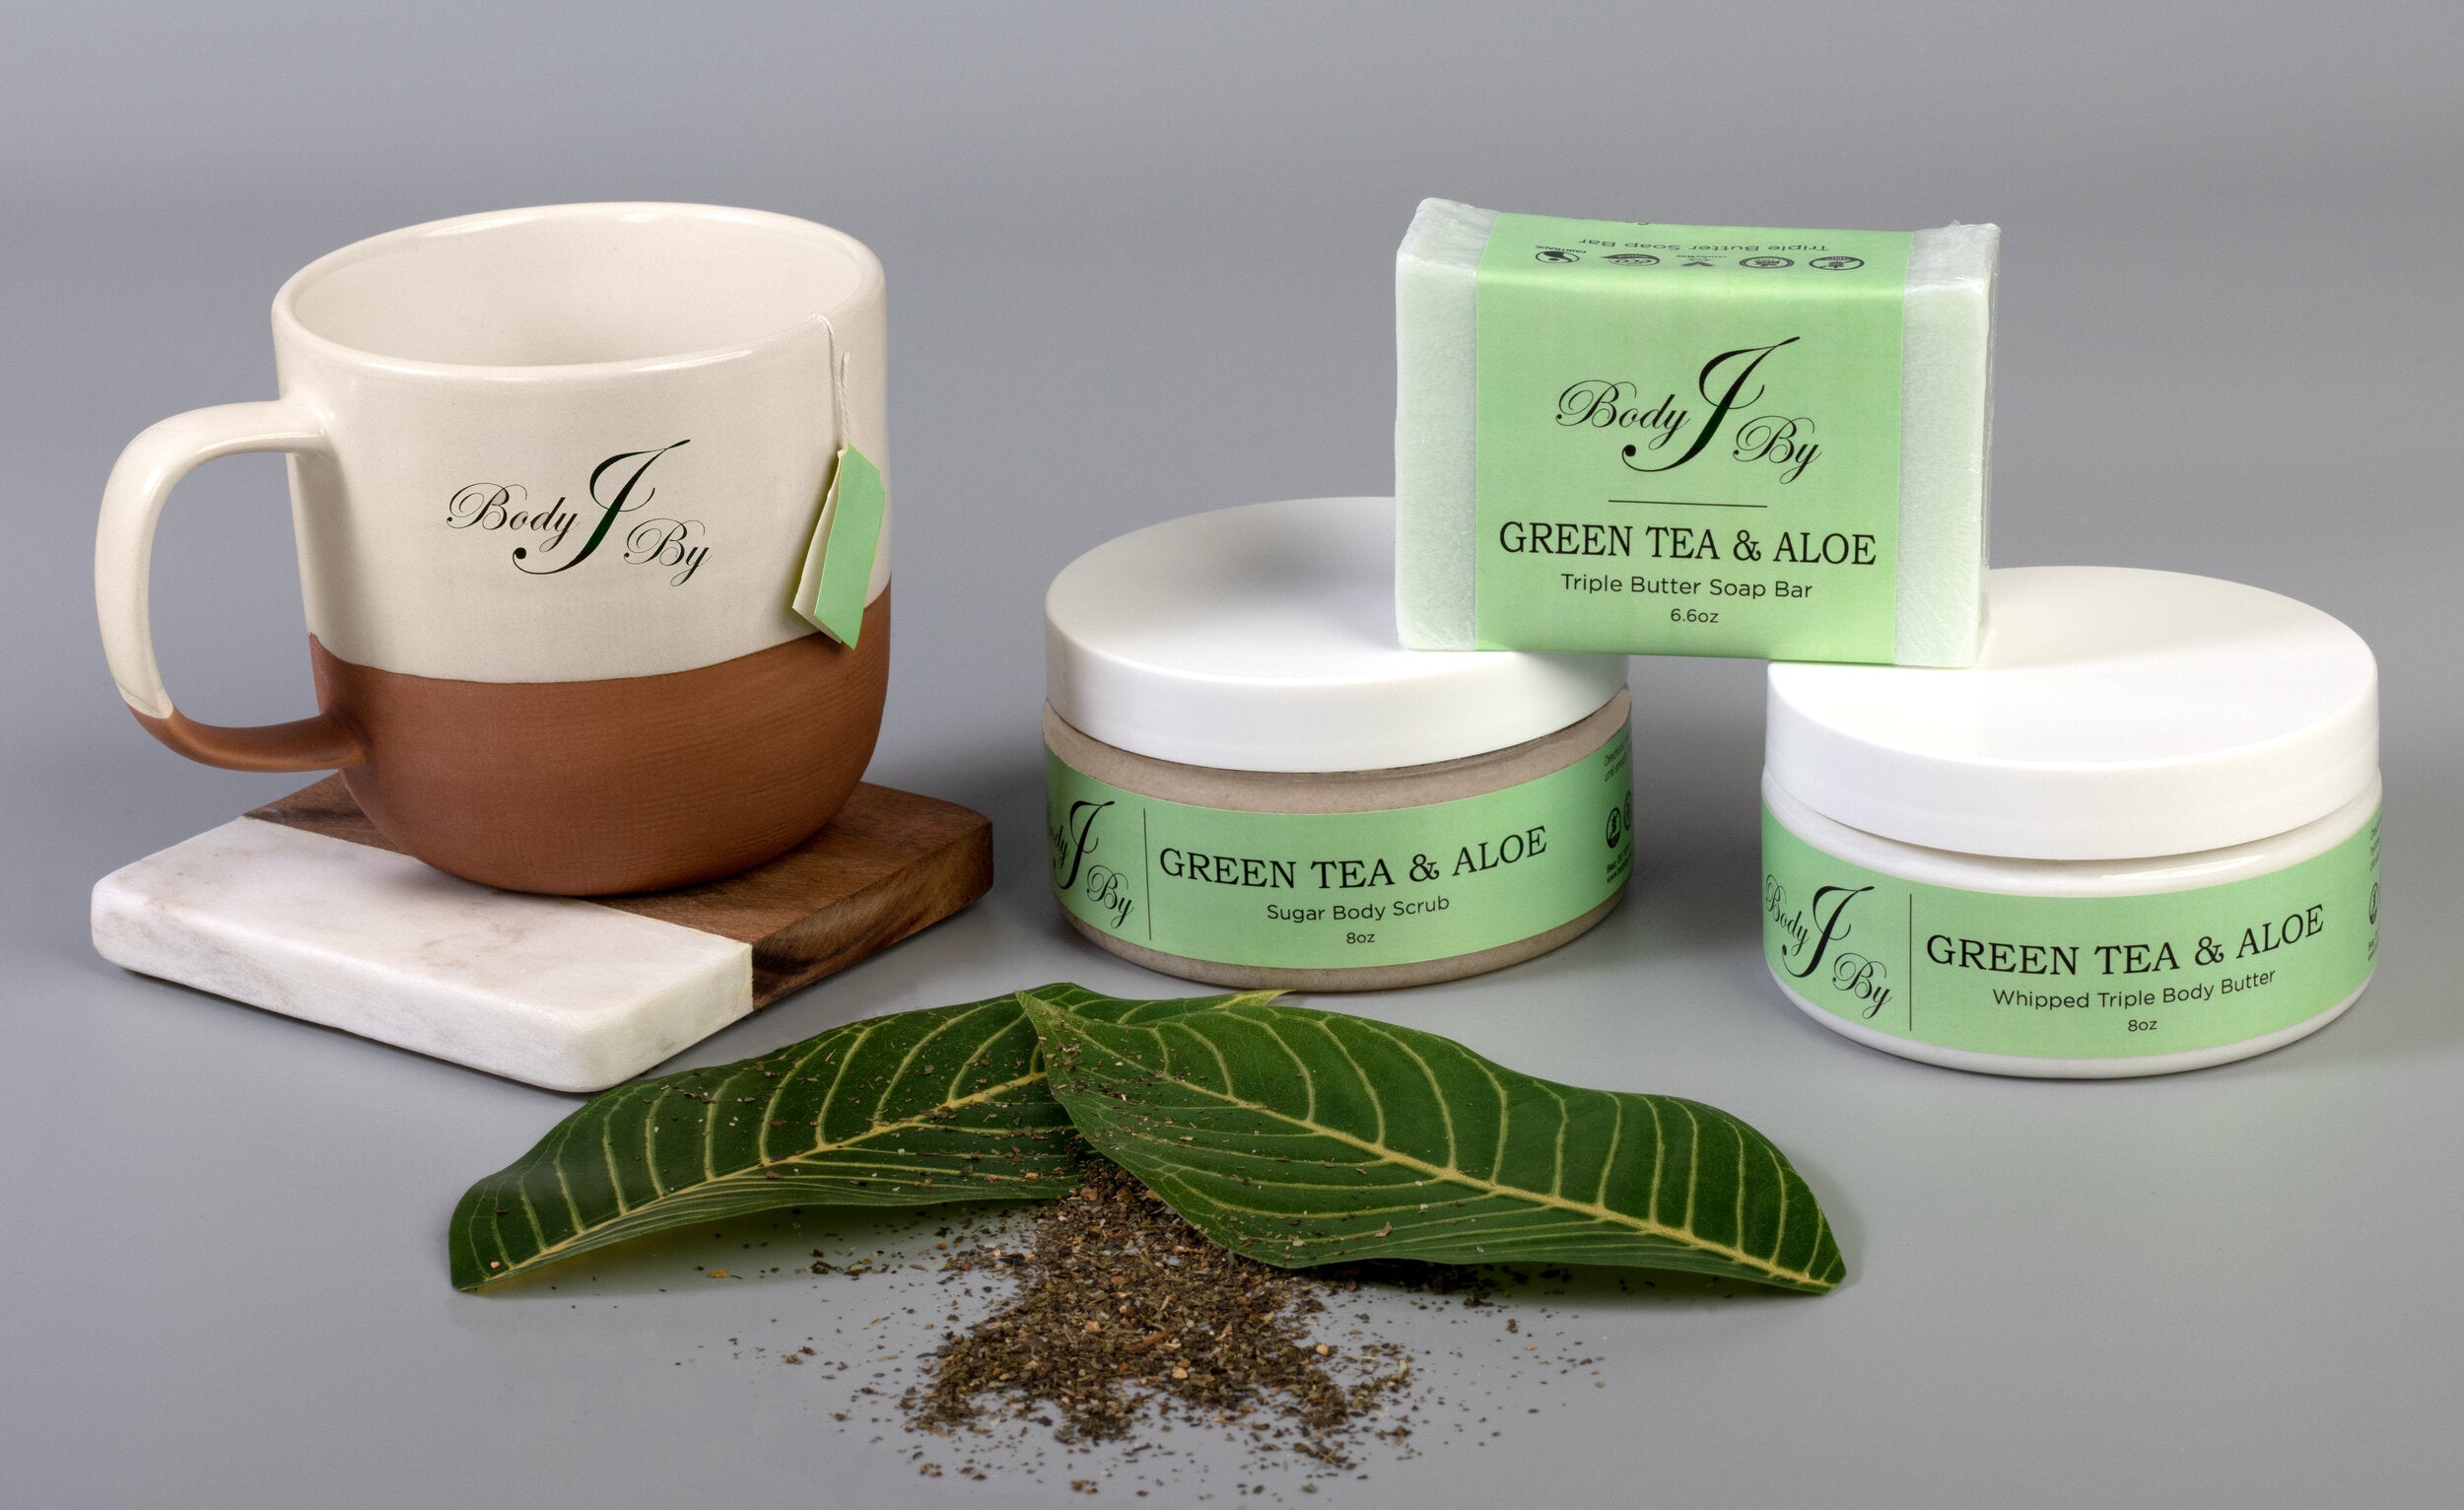 Green Tea and Aloe Skincare System - Body By J